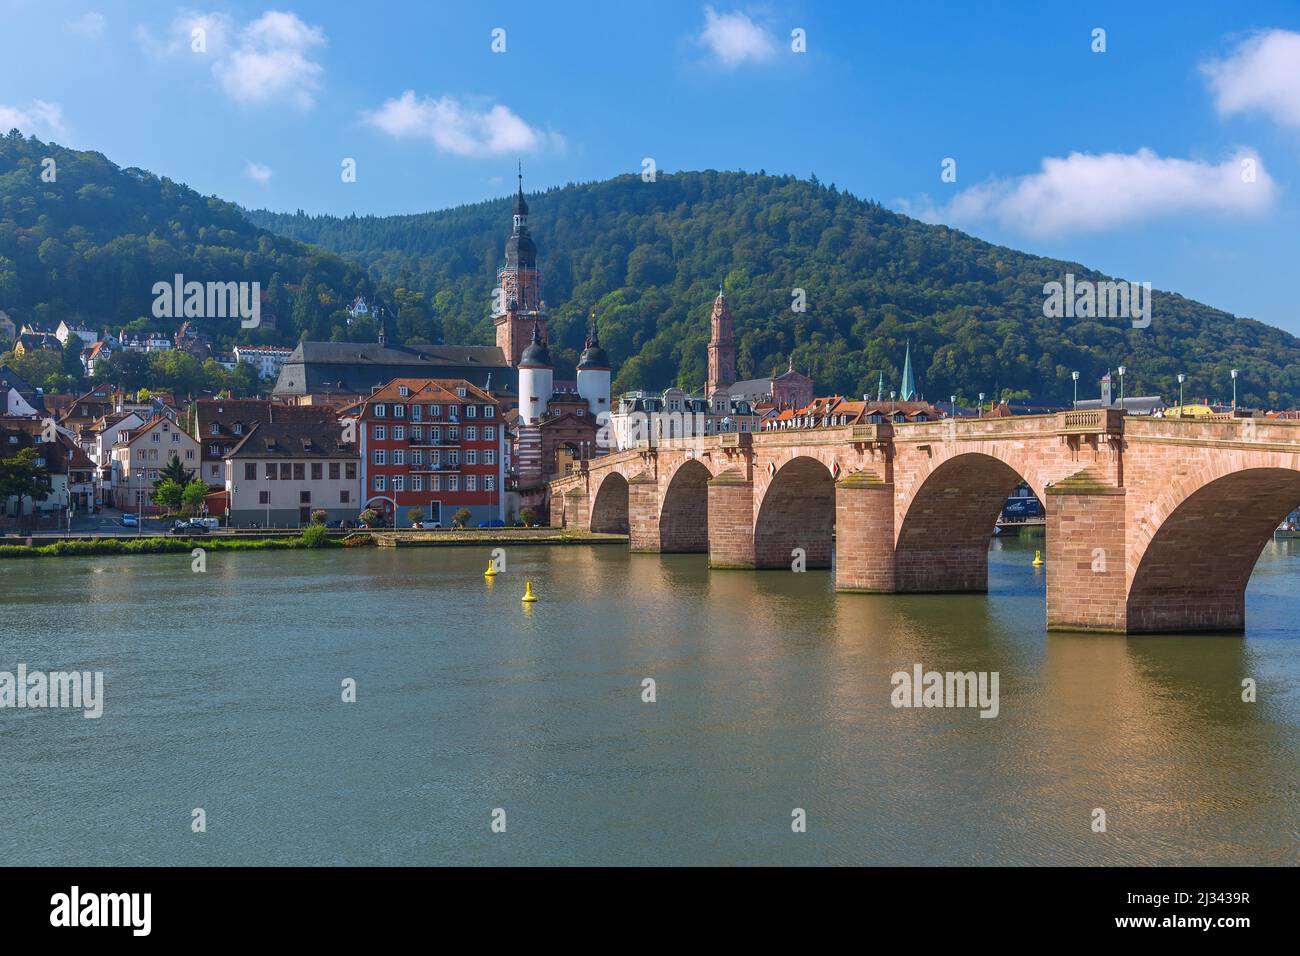 Heidelberg, view from the Nepomuk Terraces of the old town with the Church of the Holy Spirit and the Old Bridge over the Neckar Stock Photo